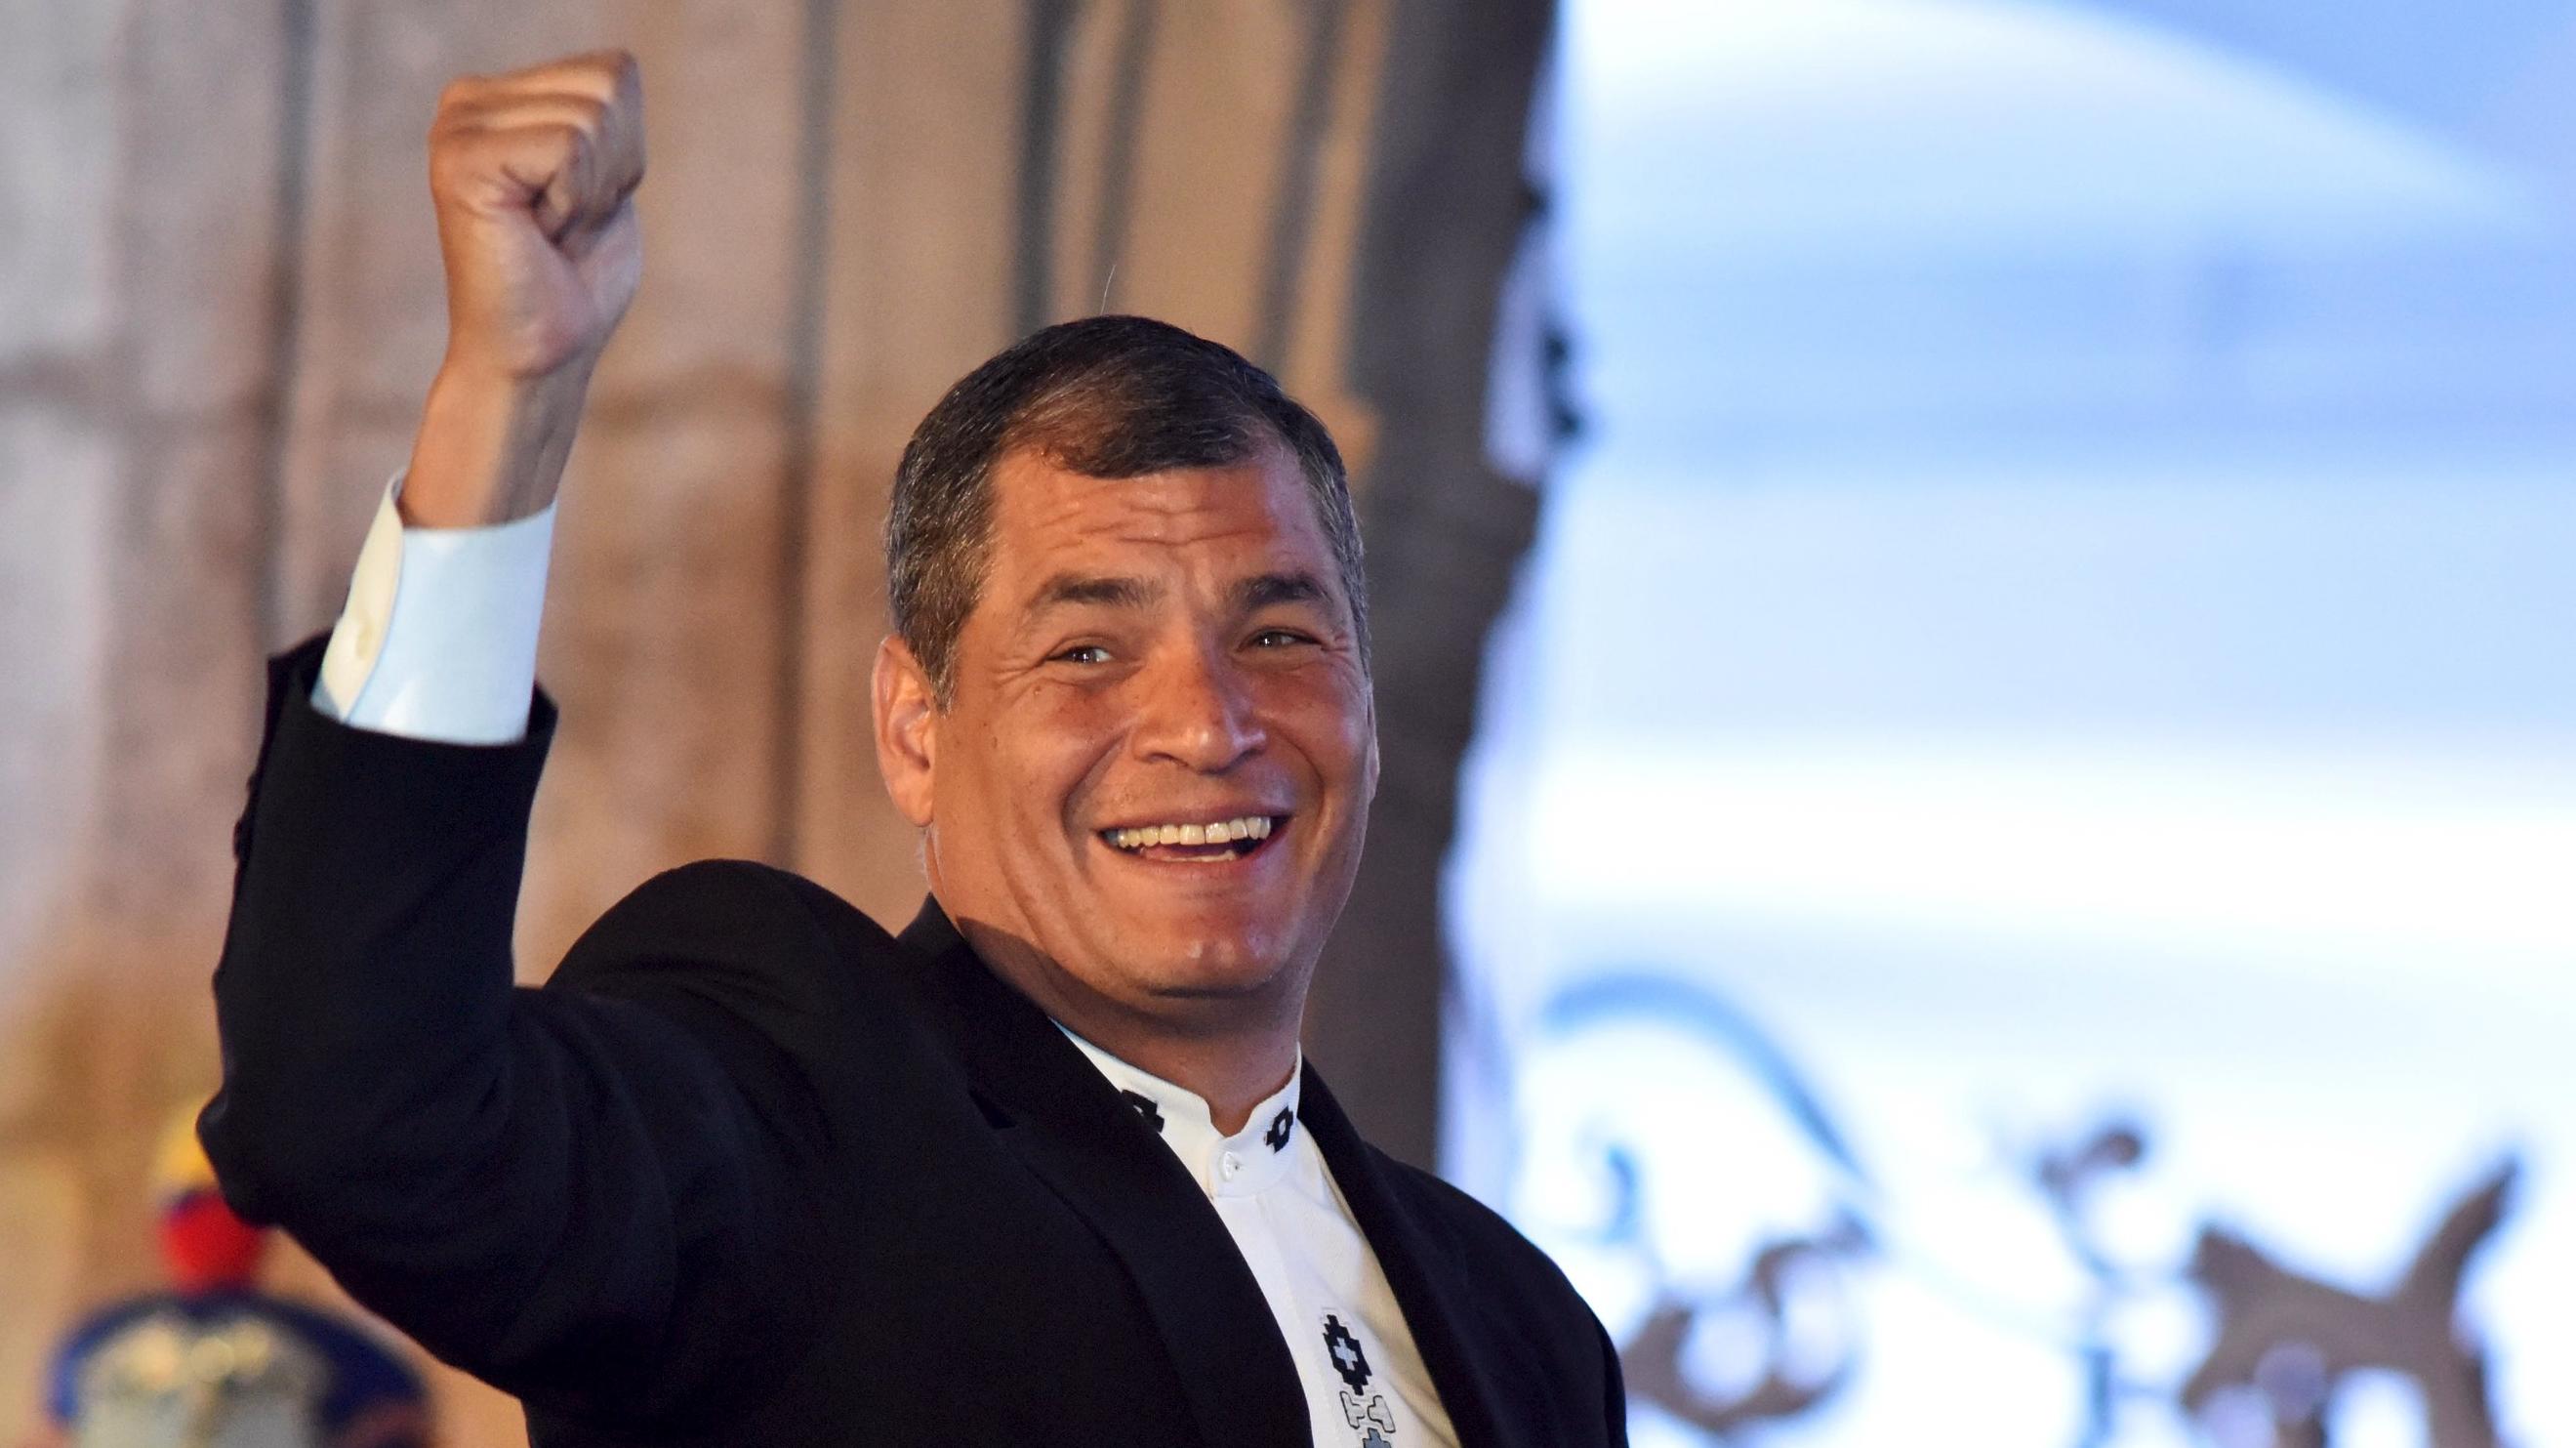 Ecuador's president Rafael Correa gestures before entering a meeting with Pope Francis (not pictured) in Quito, Ecuador, July 6, 2015.